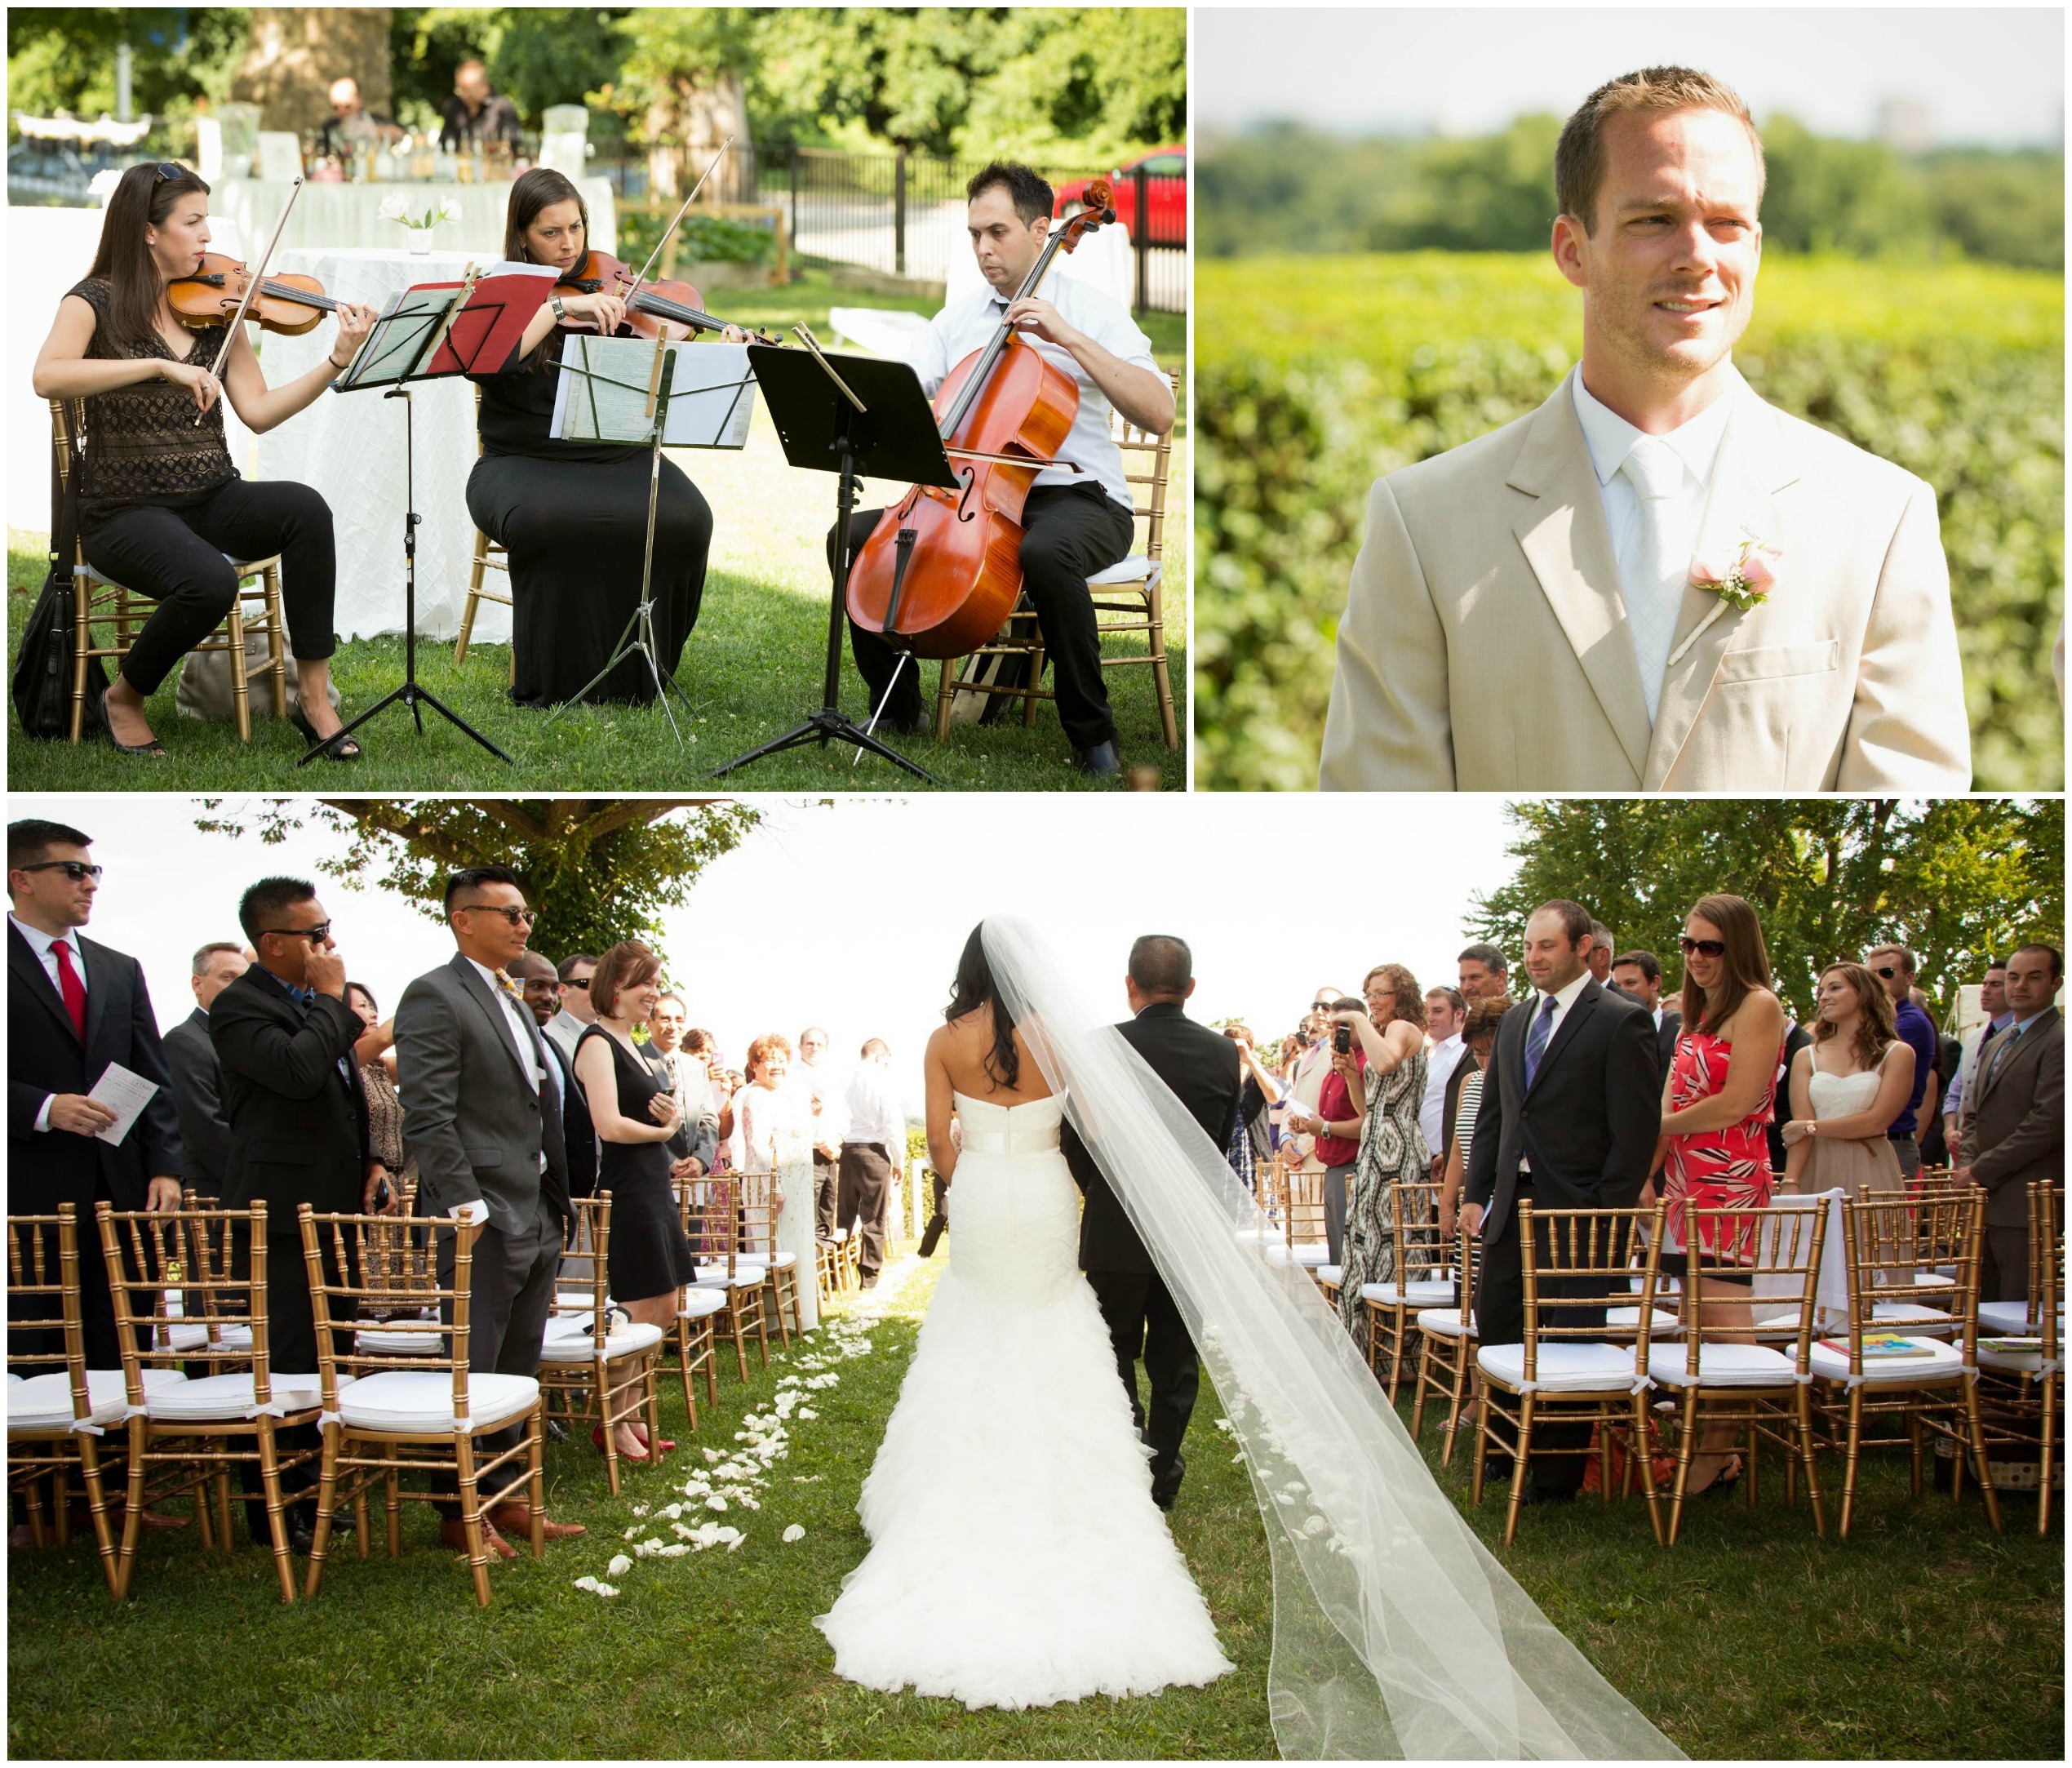 Outdoor ceremony with petal lined aisle